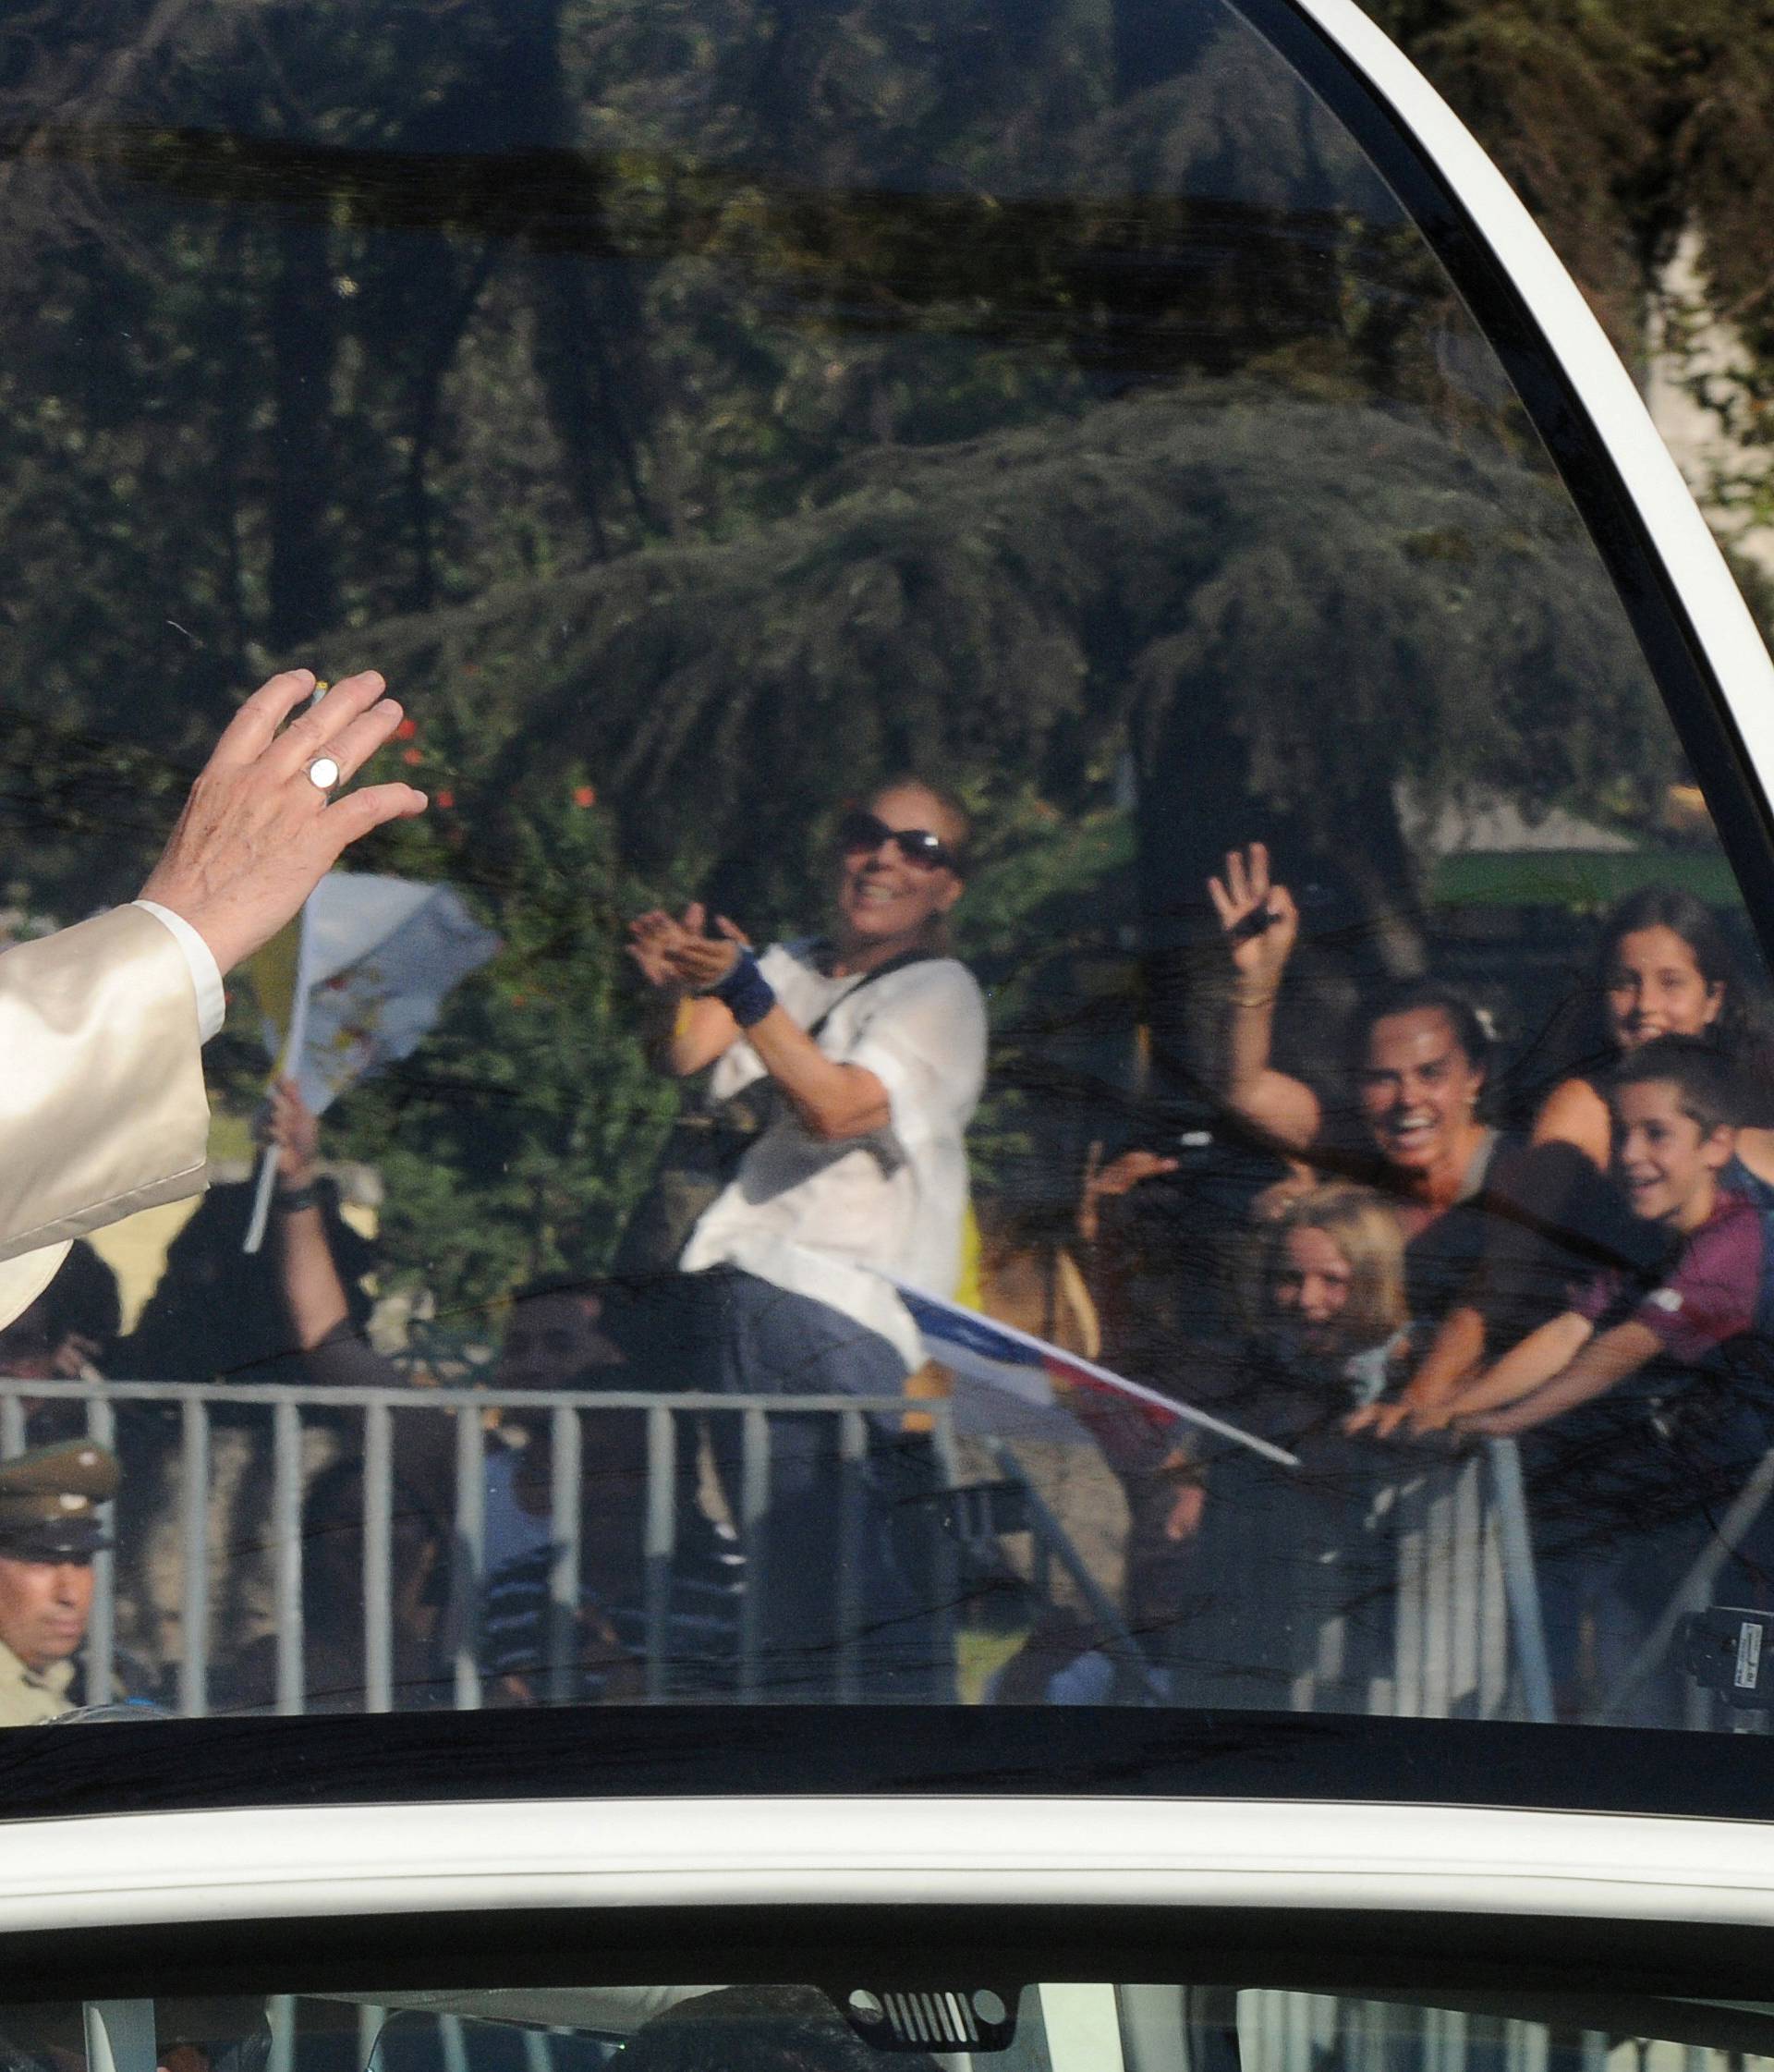 Pope Francis waves while driving through Santiago